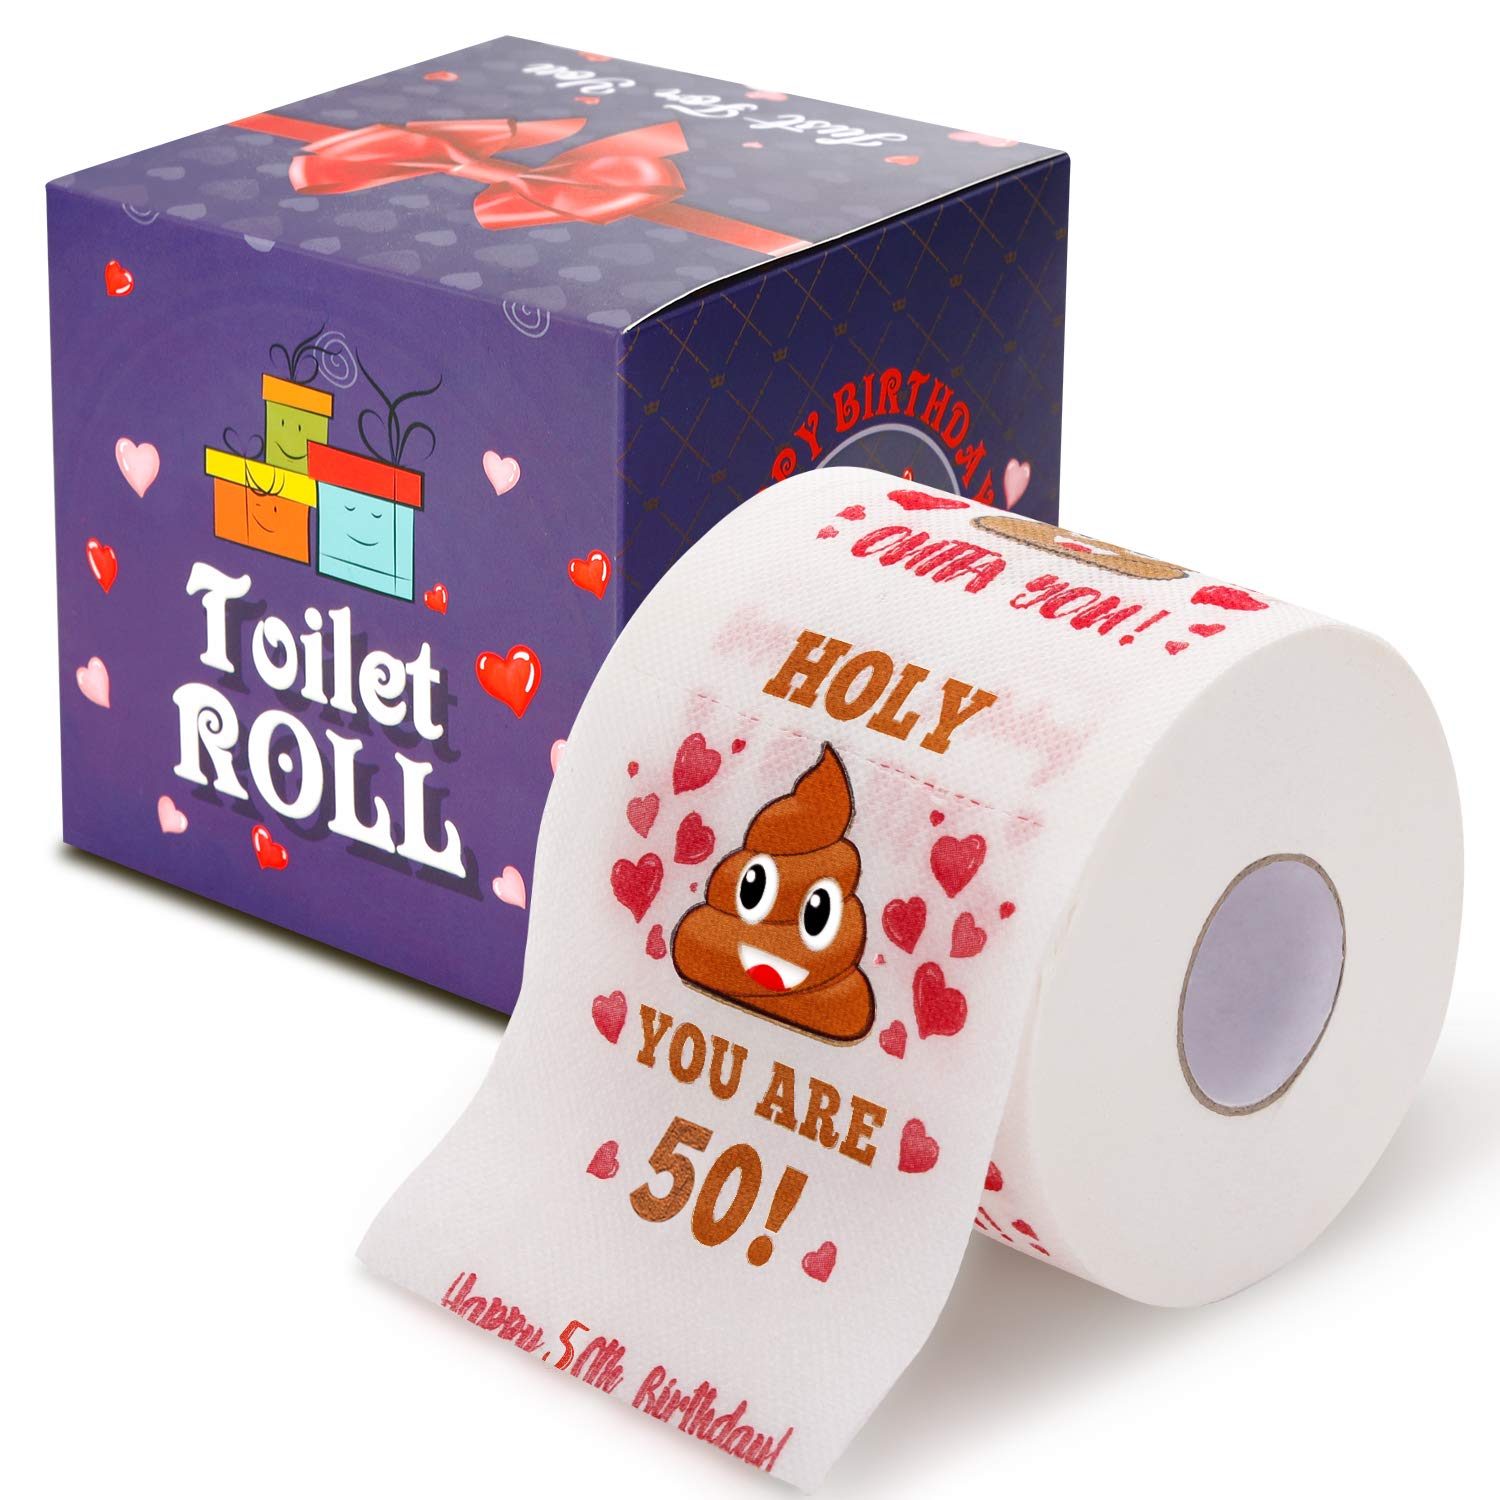 Mua 50th Birthday Gifts for Men and Women - Happy Prank Toilet Paper - 50th  Birthday Decorations for Him, Her - Party Supplies Favors Ideas - Funny Gag  Gifts, Novelty Bday Present